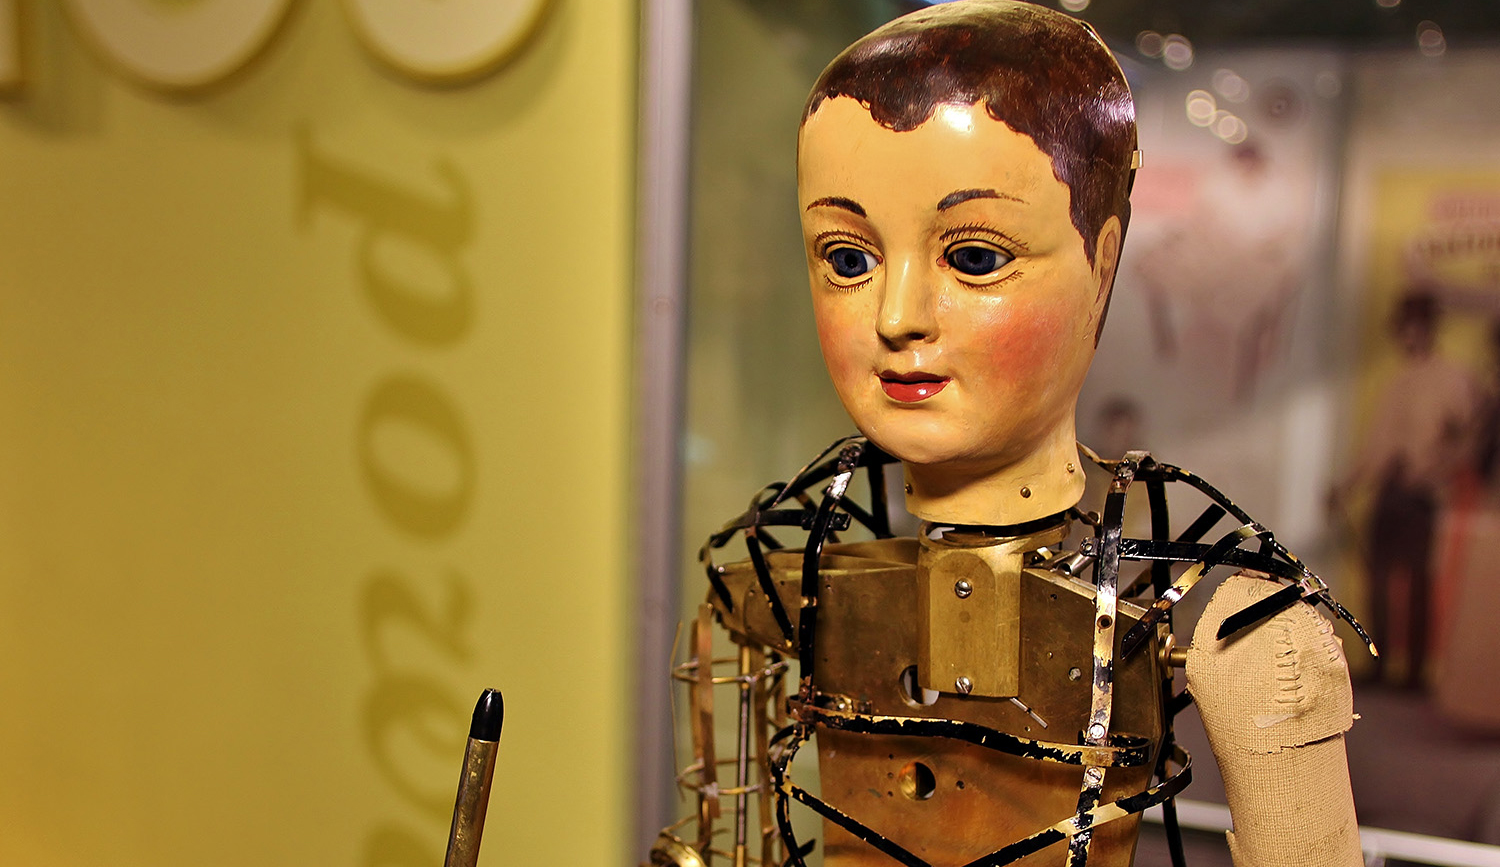 The Automaton at The Franklin Institute